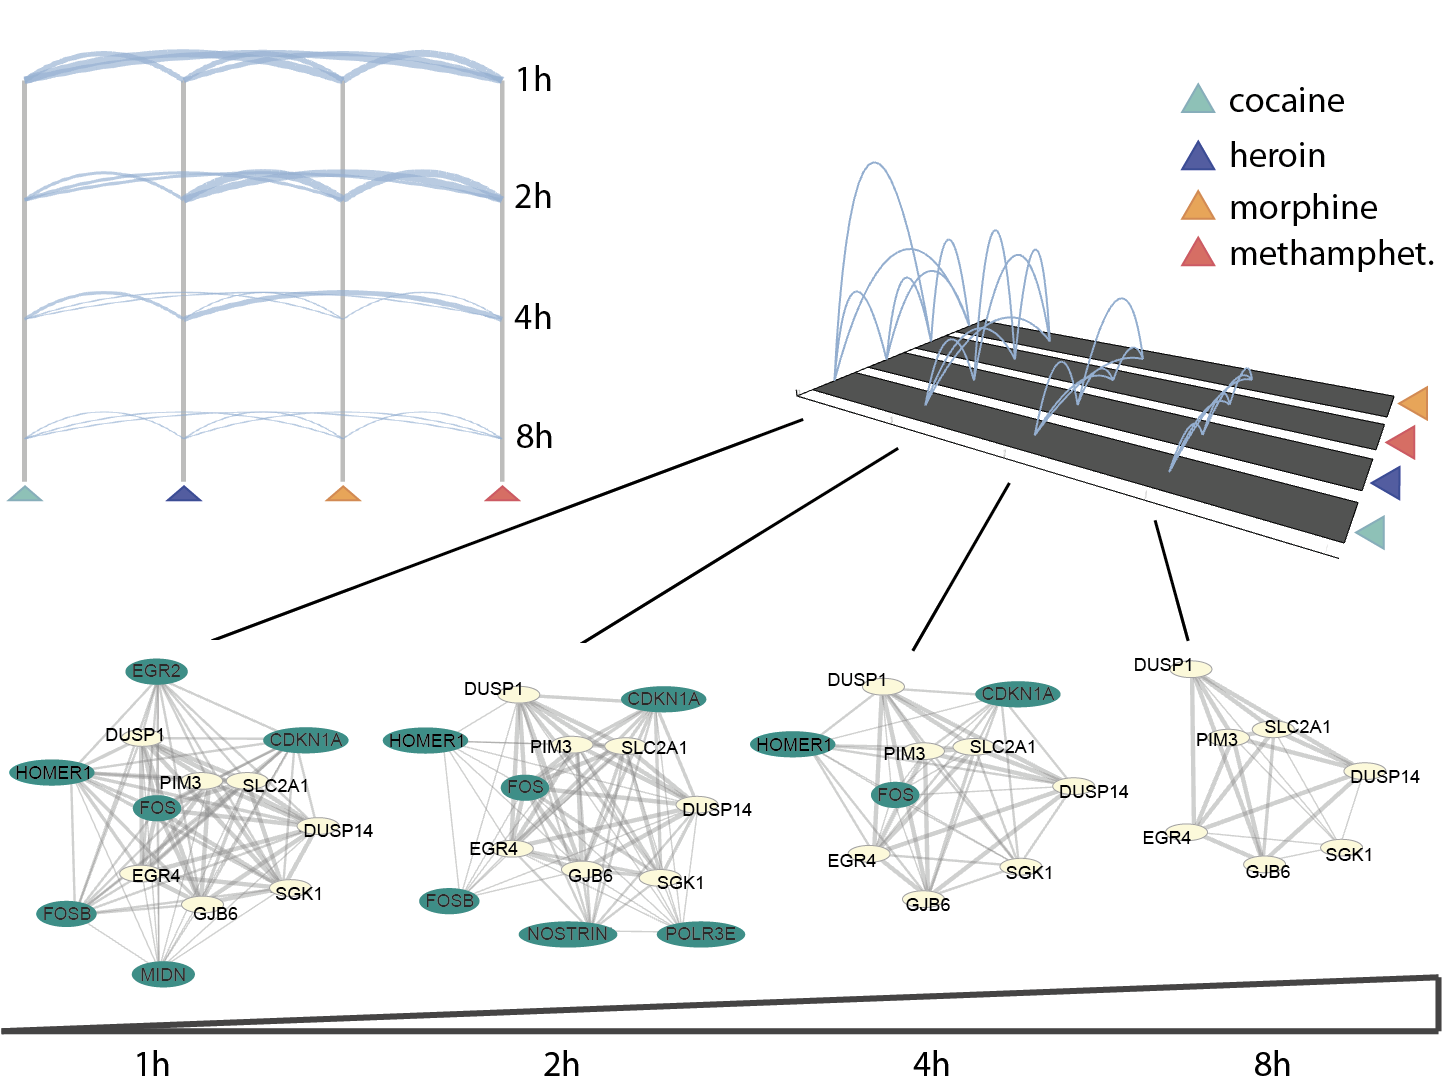 The number of commonly highly expressed genes upon induction of different drugs is displayed through drug connections at every time point. Changes in the network of genes sharing drug phenotypes are also shown through time. 